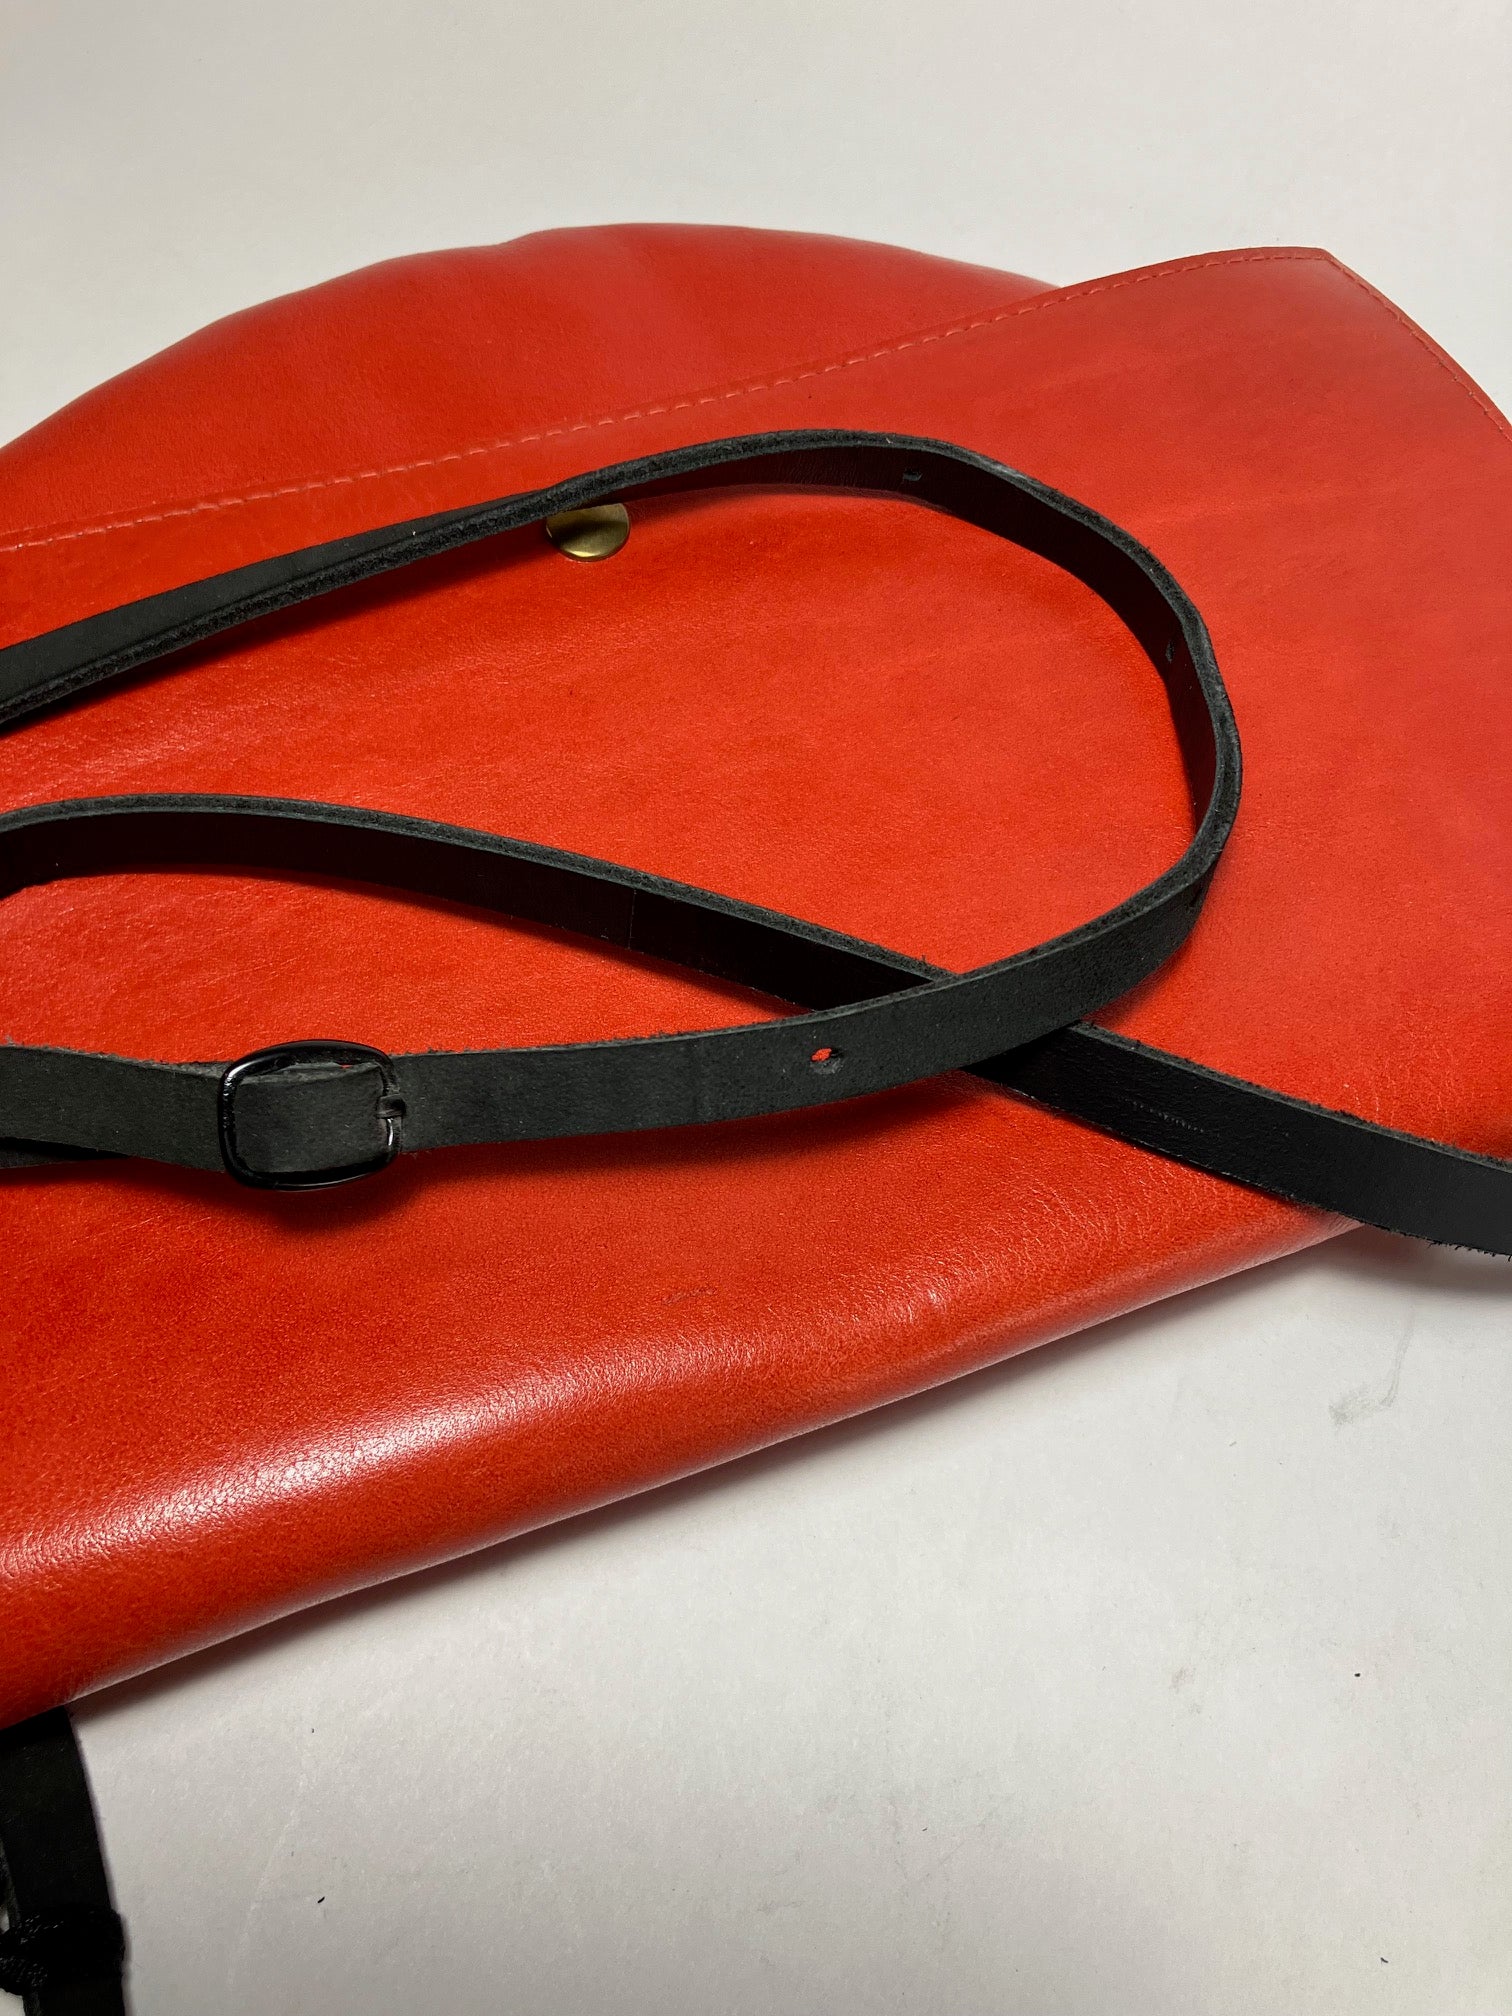 SAMPLE. ONE OF A KIND Minimalist small leather bag in bright red leather